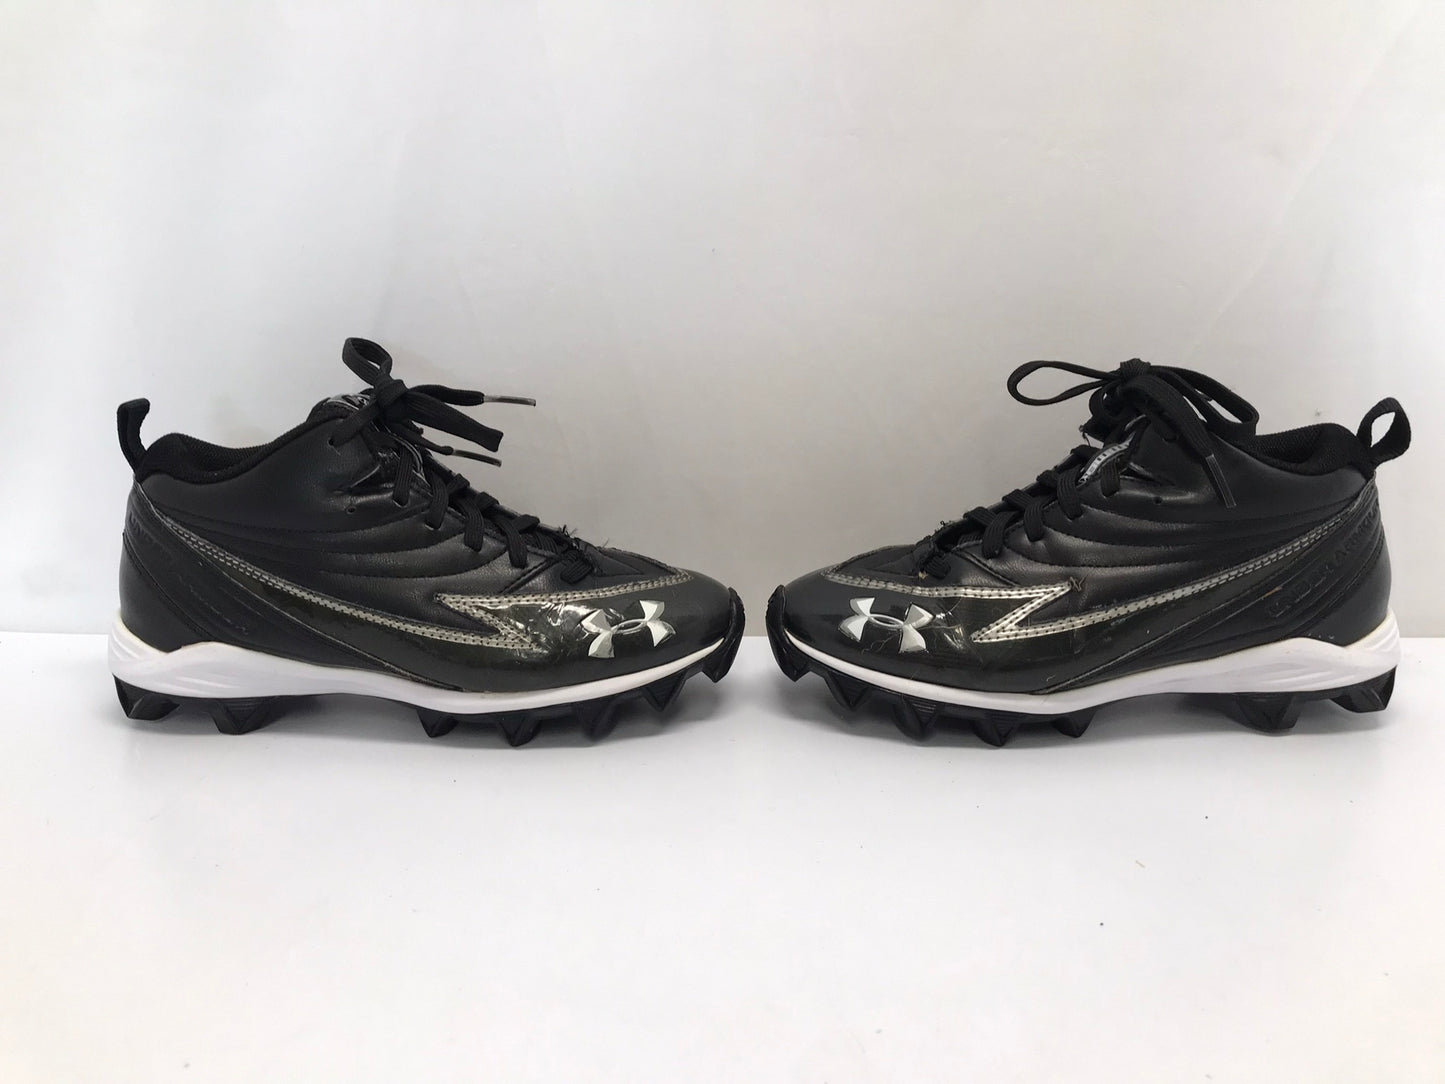 Baseball Shoes Cleats Child Size 5  Under Armour Black White Excellent